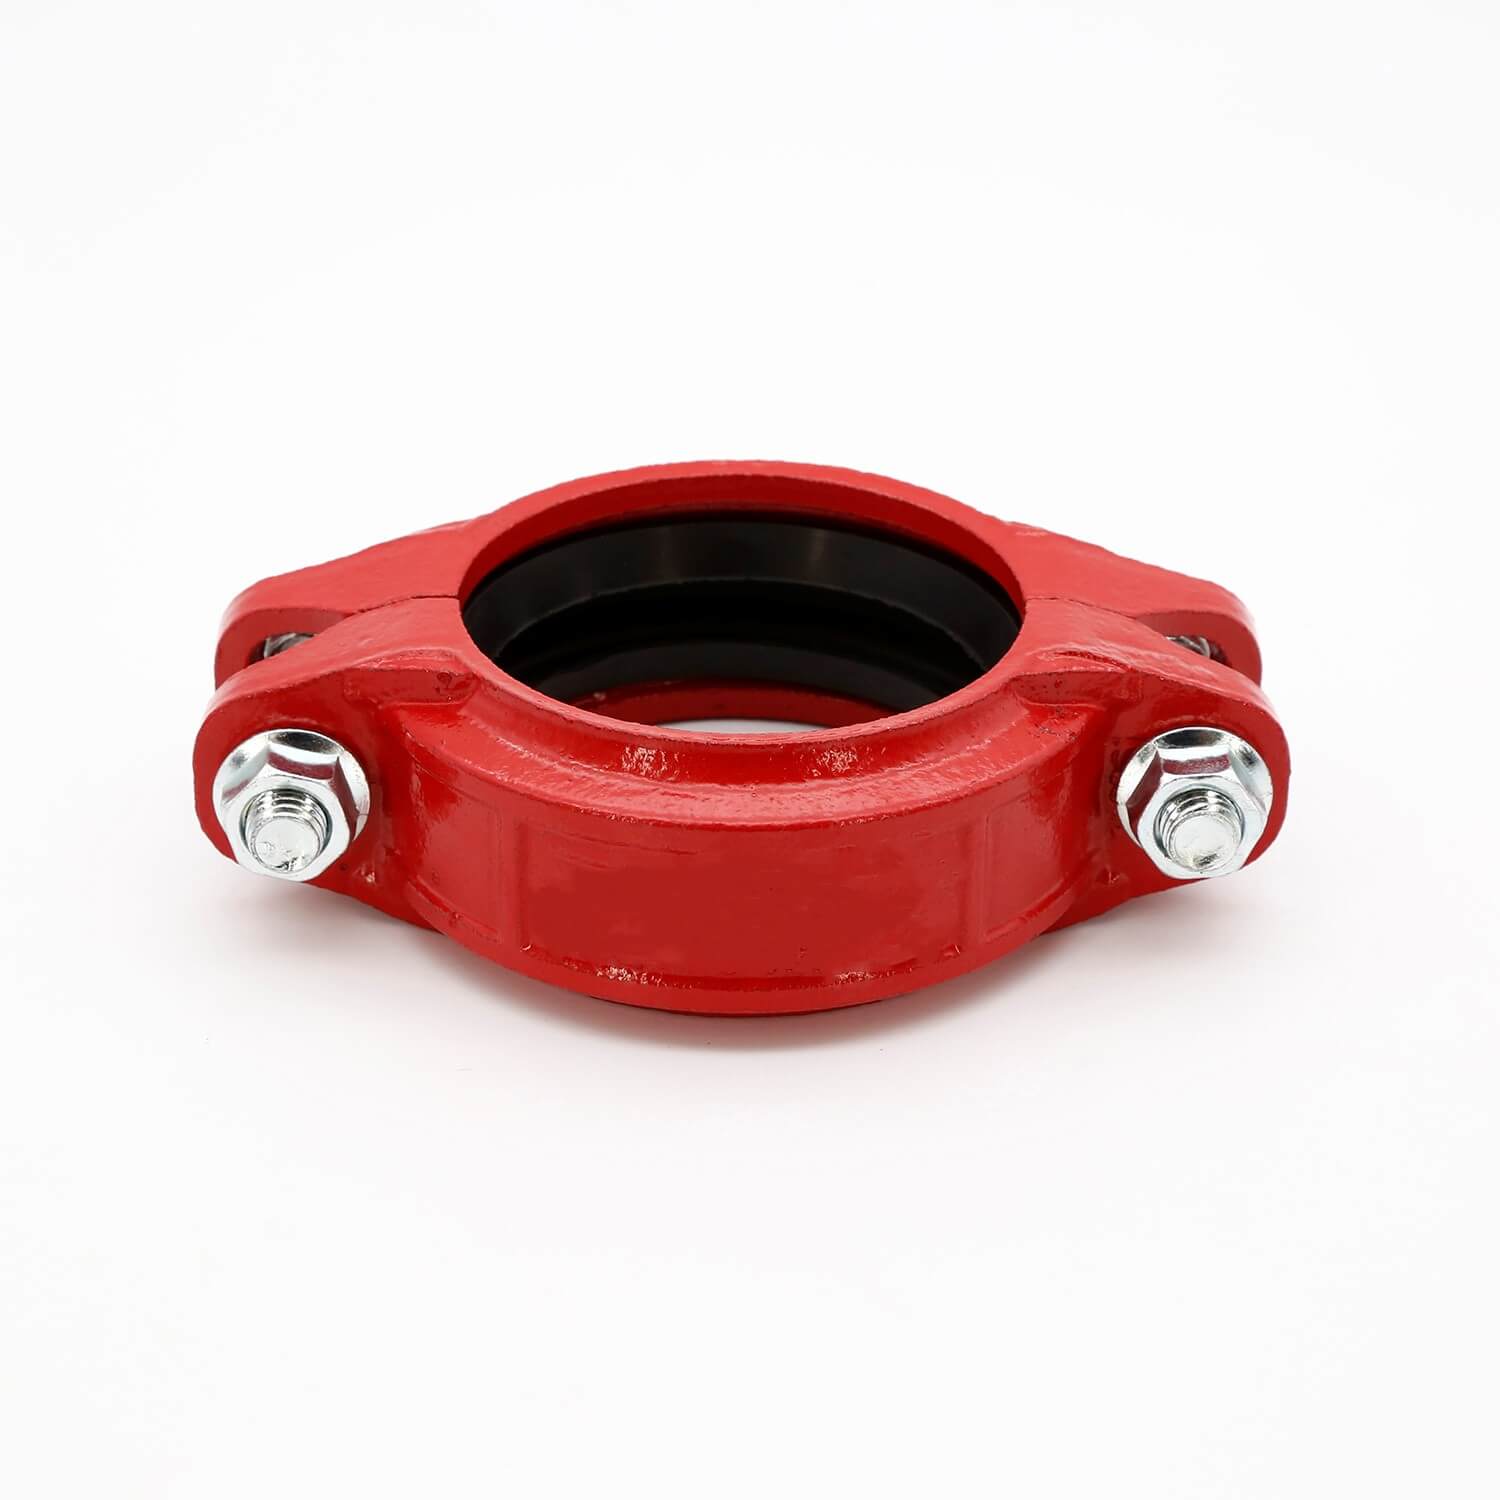 Tontr 2.5 MPa 8 in Grooved Piping System Pipe fitting Rigid Coupling